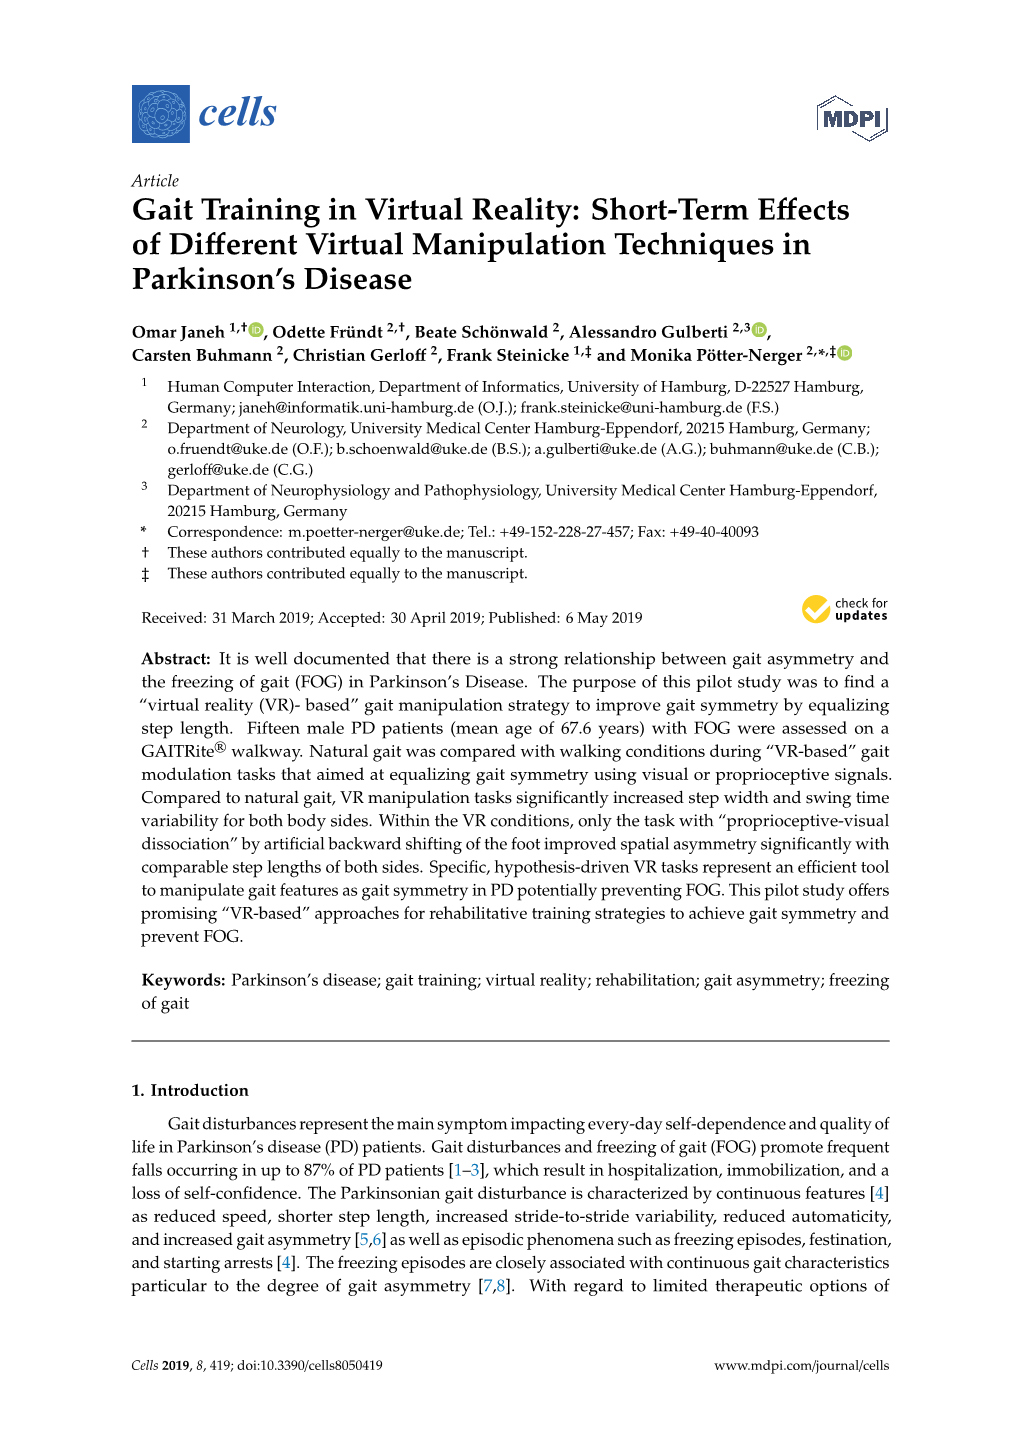 Gait Training in Virtual Reality: Short-Term Effects of Different